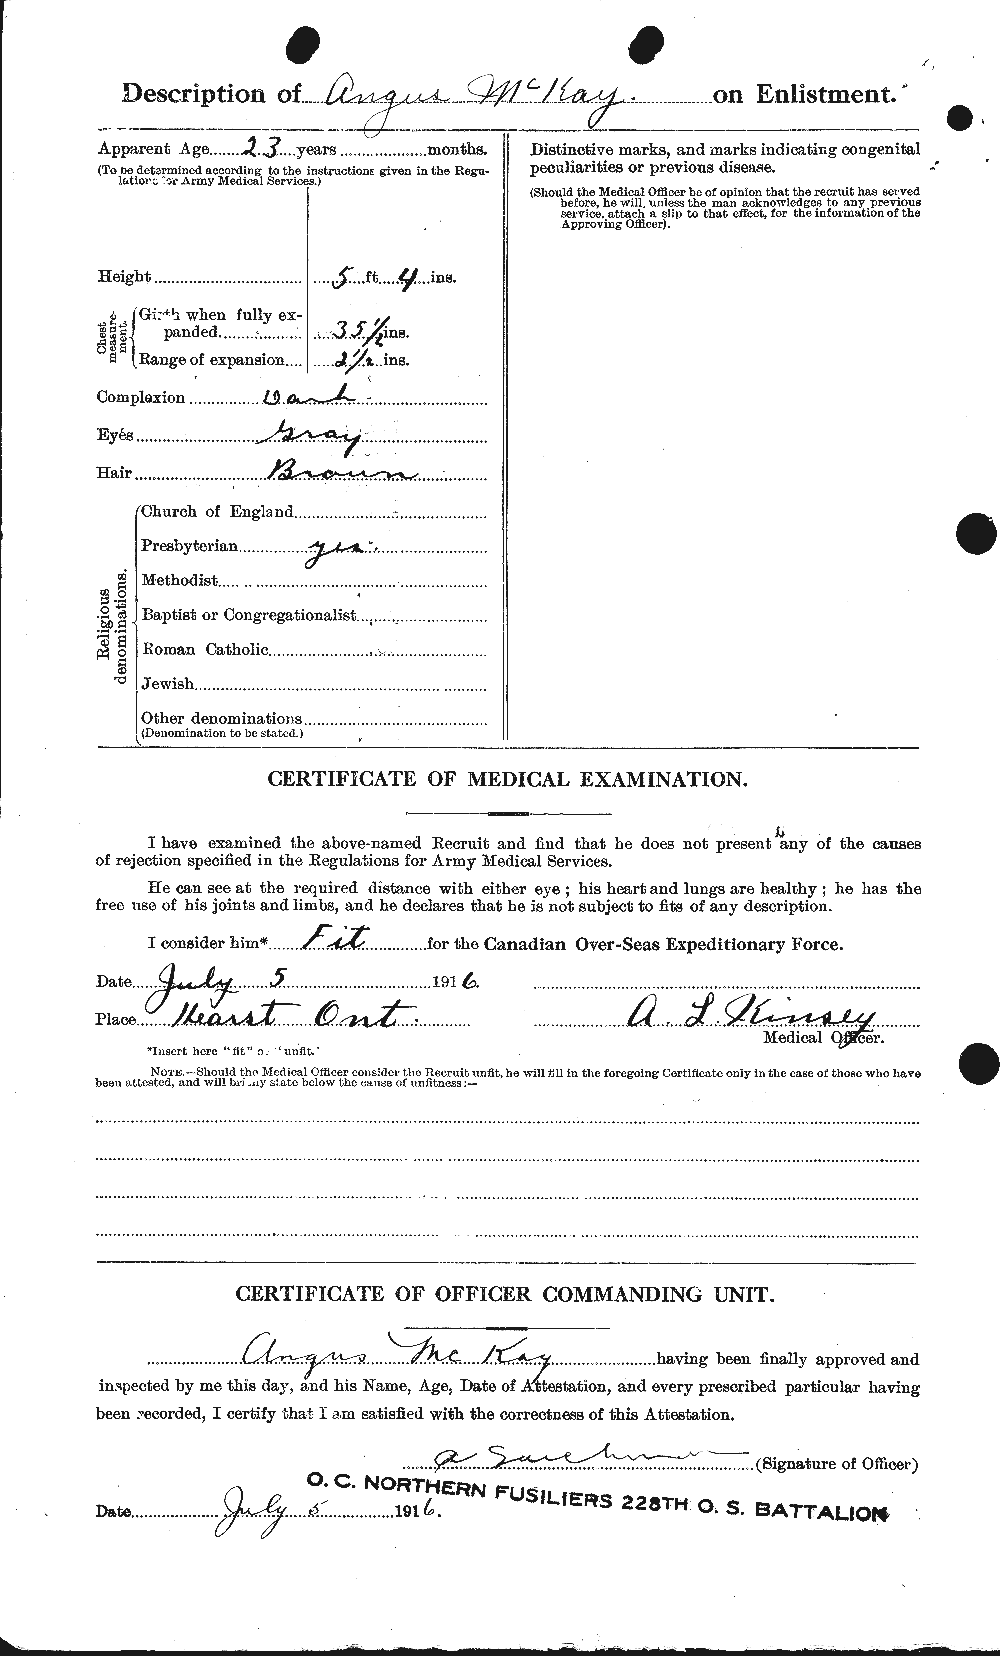 Personnel Records of the First World War - CEF 530990b